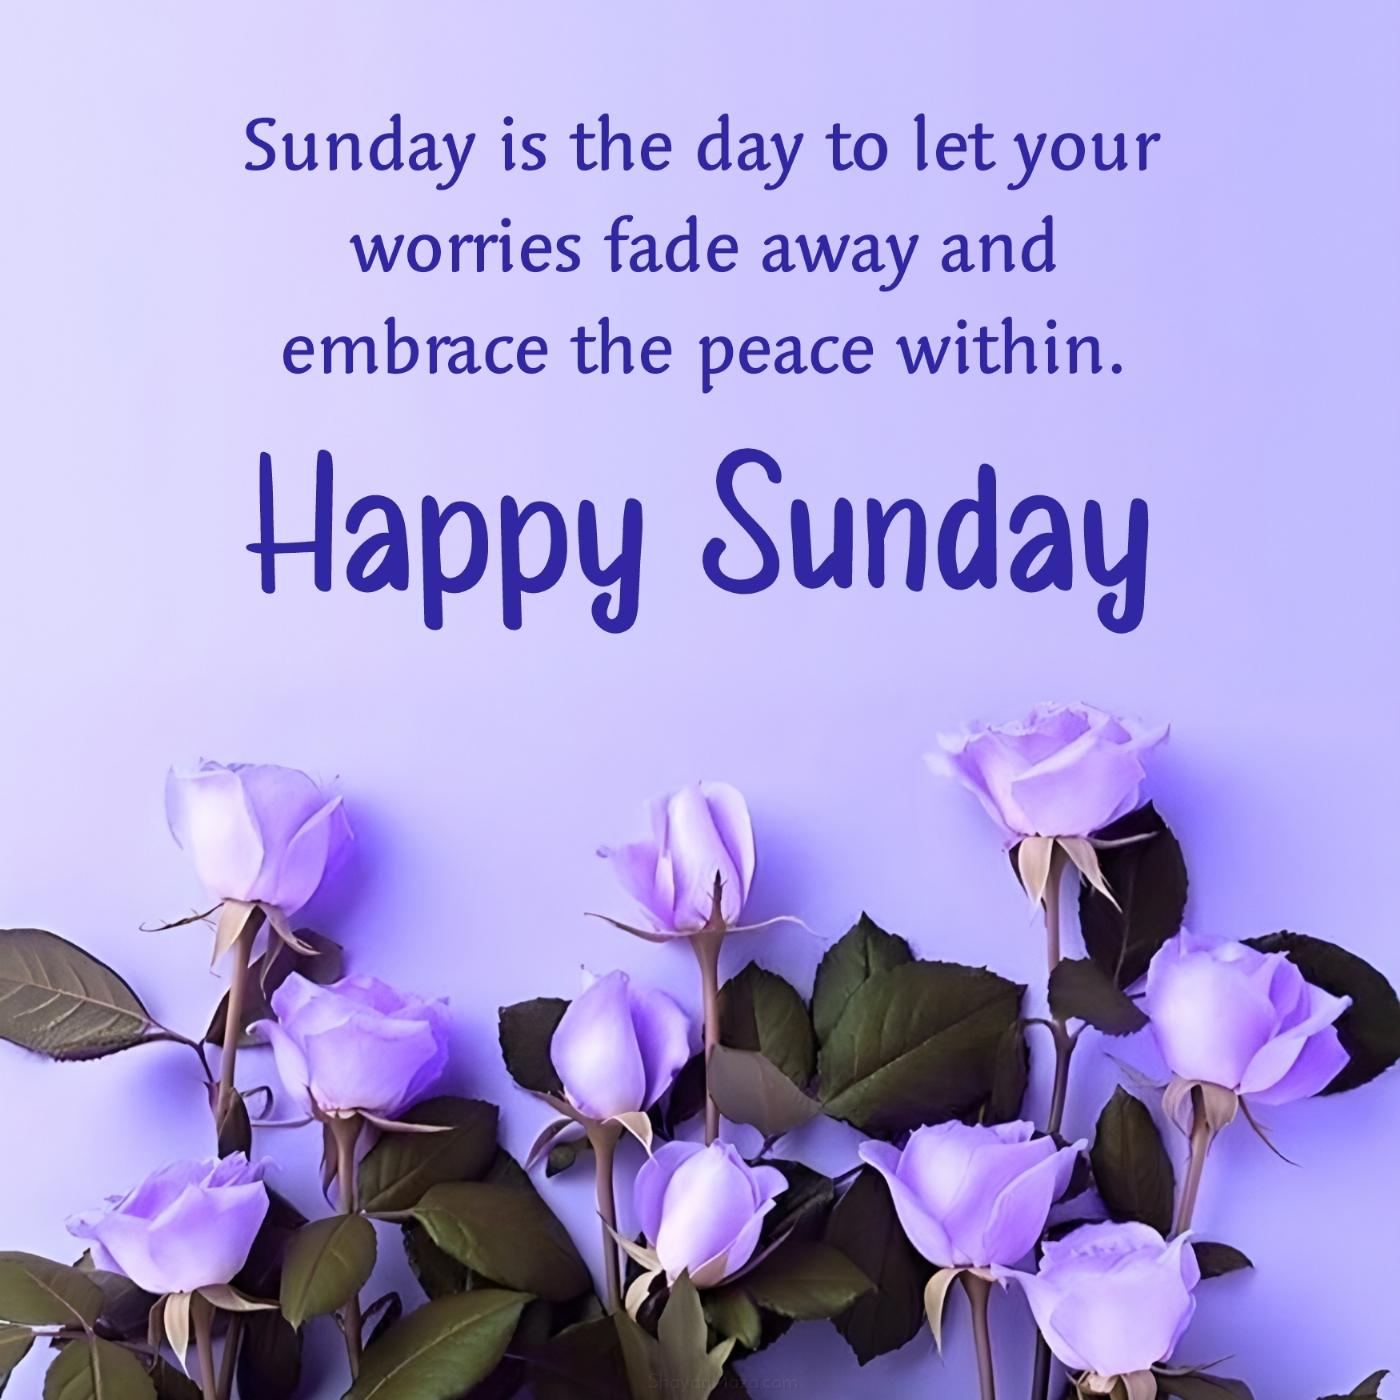 Sunday is the day to let your worries fade away